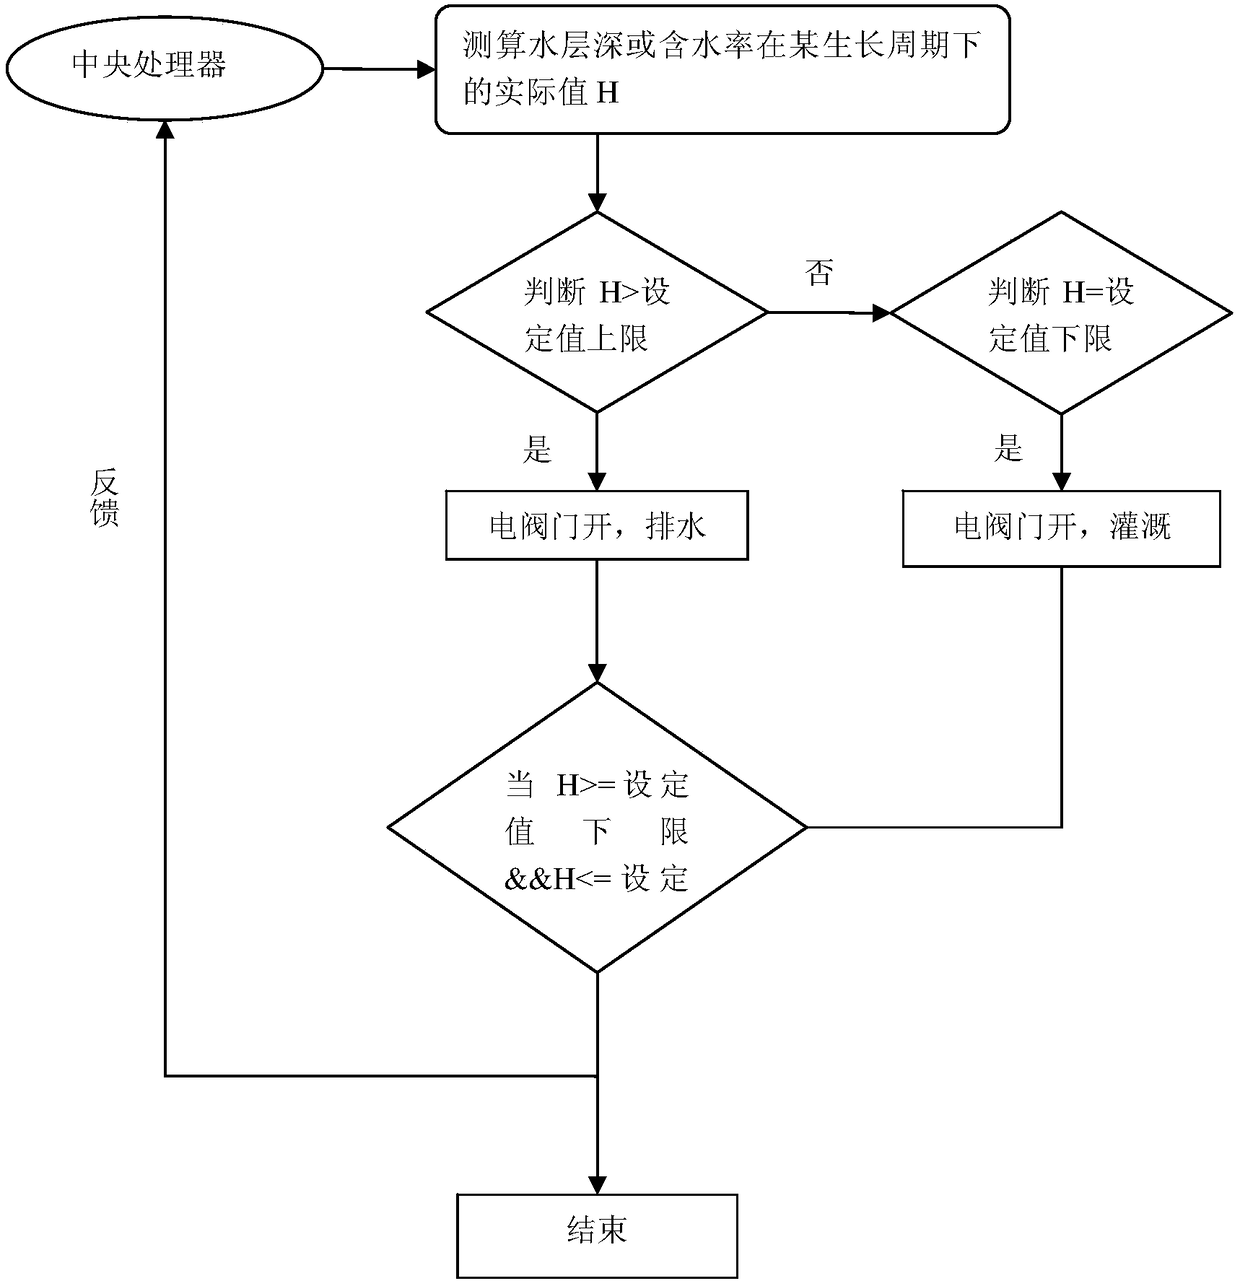 A simulation control system and method for paddy field oxygenation irrigation and drainage